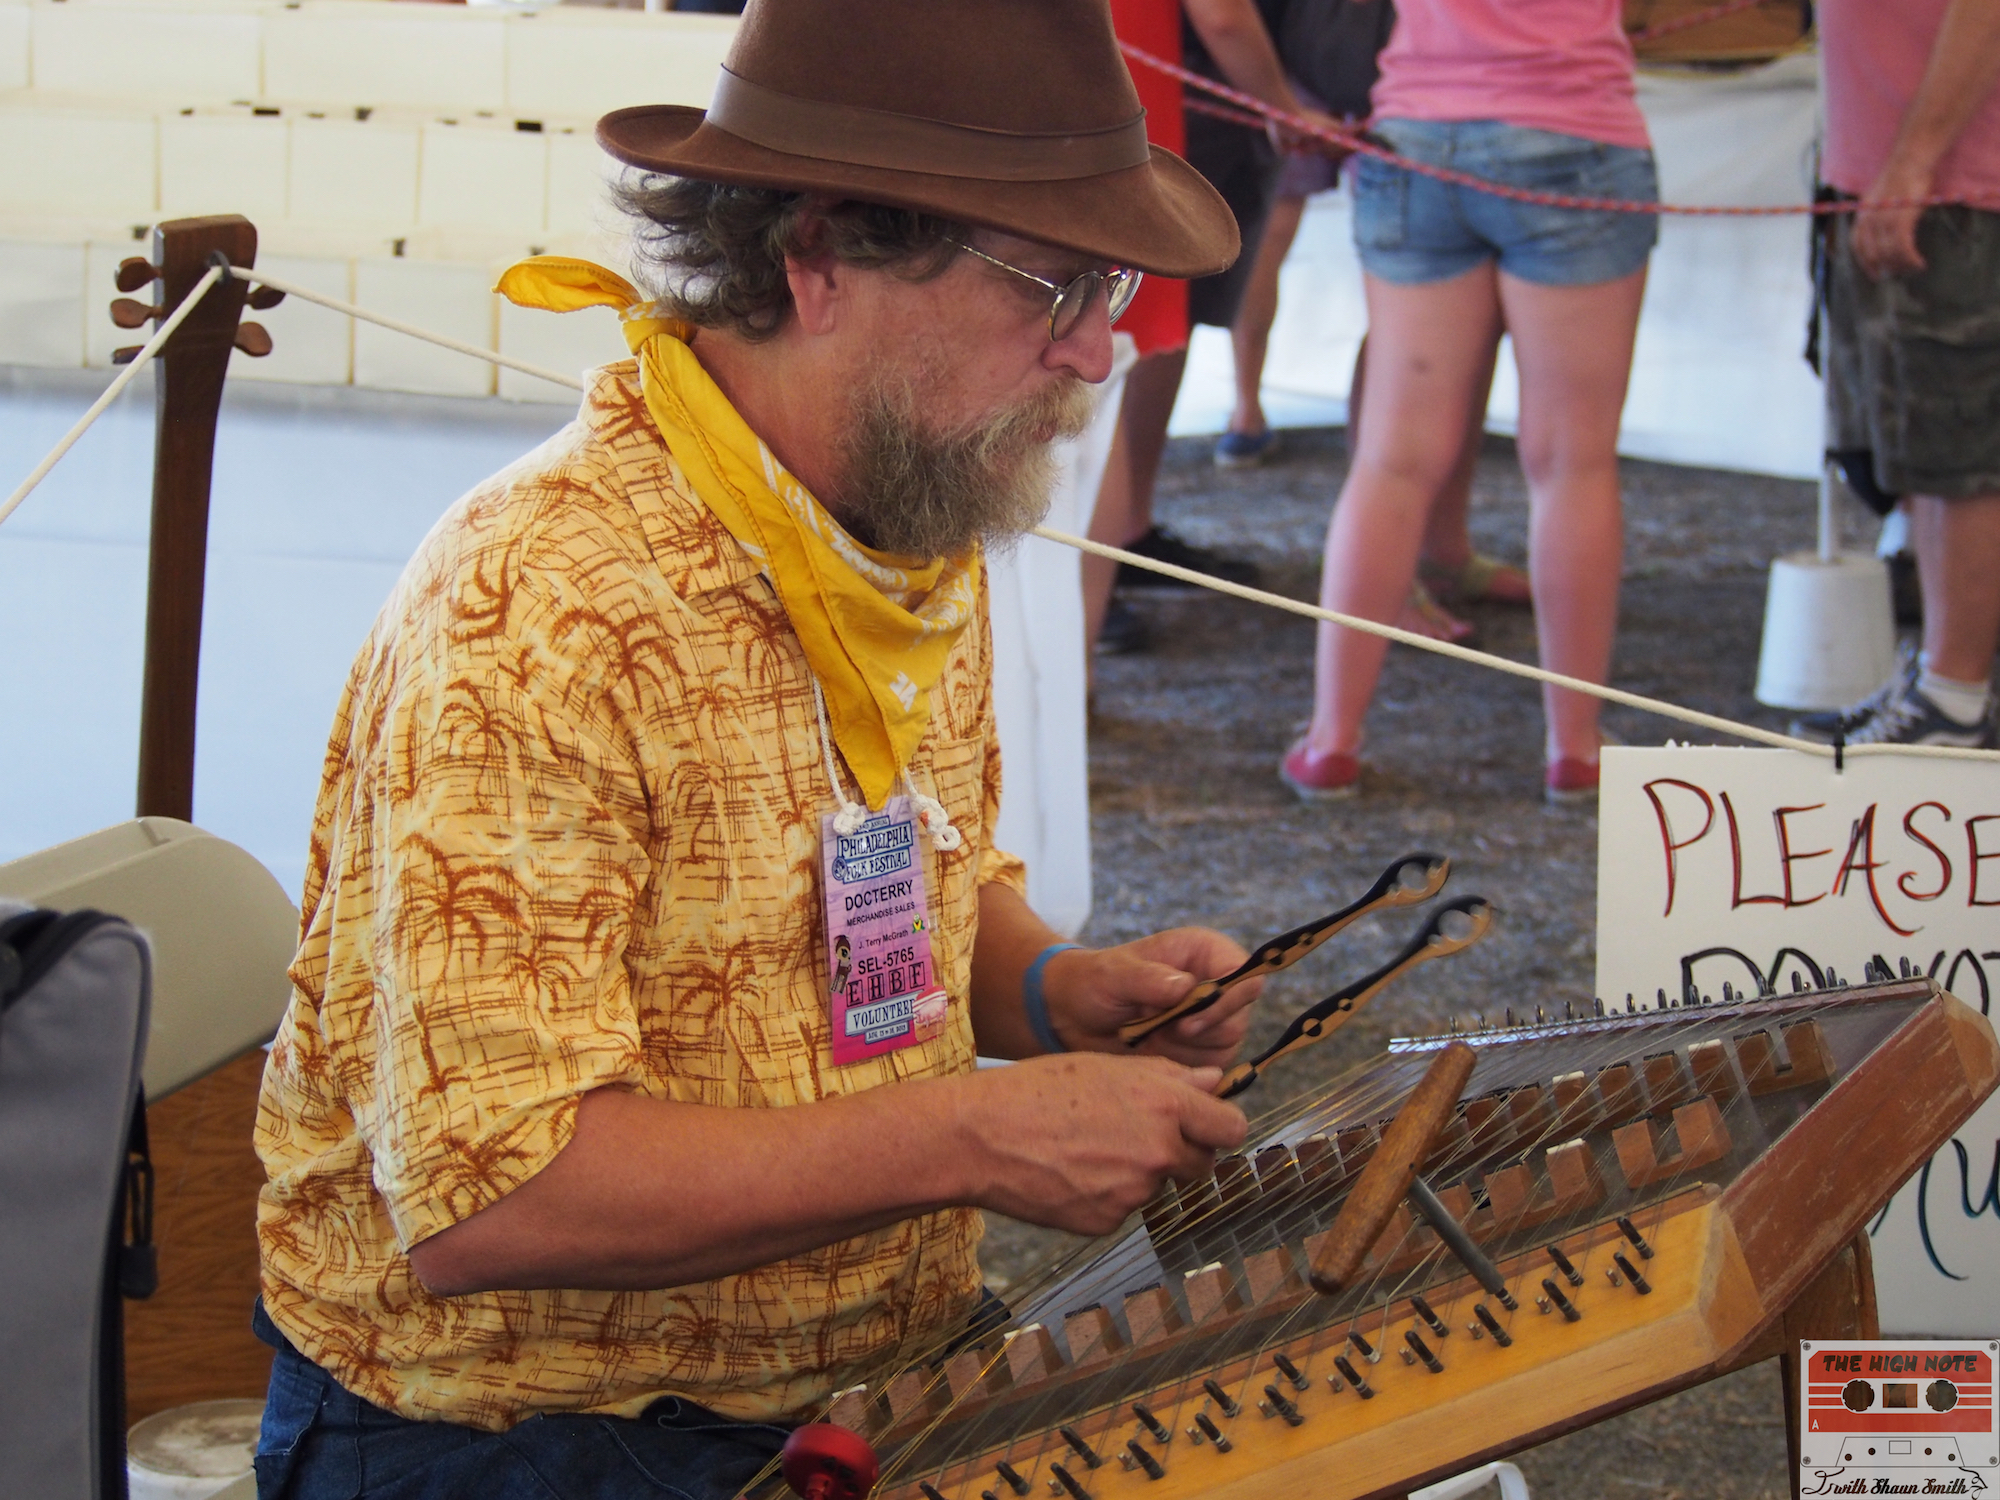 Doc Terry plays the Hammered Dulcimer in the Philadelphia Folksong Society tent at the Philadelphia Folk Festival.